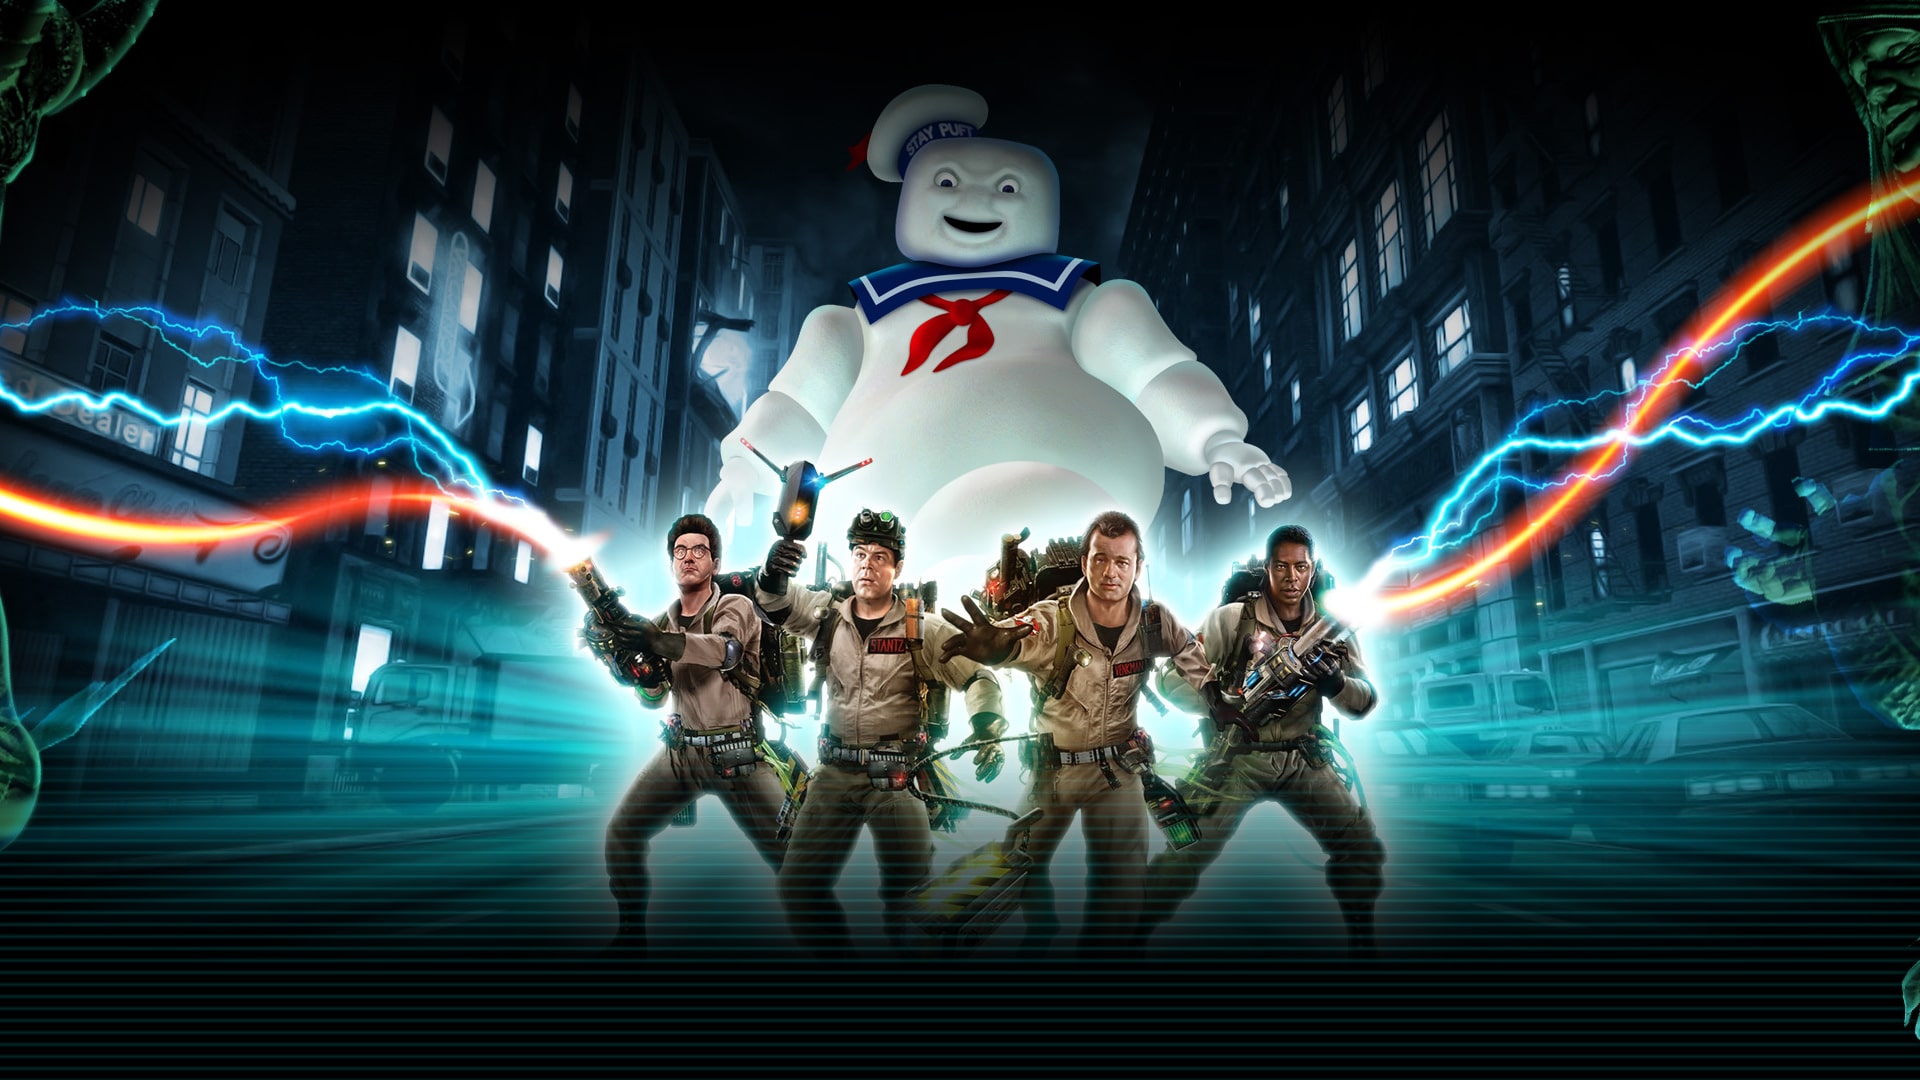 Afterlife Desktop Wallpaper - Ghostbusters The Video Game Remastered - HD Wallpaper 